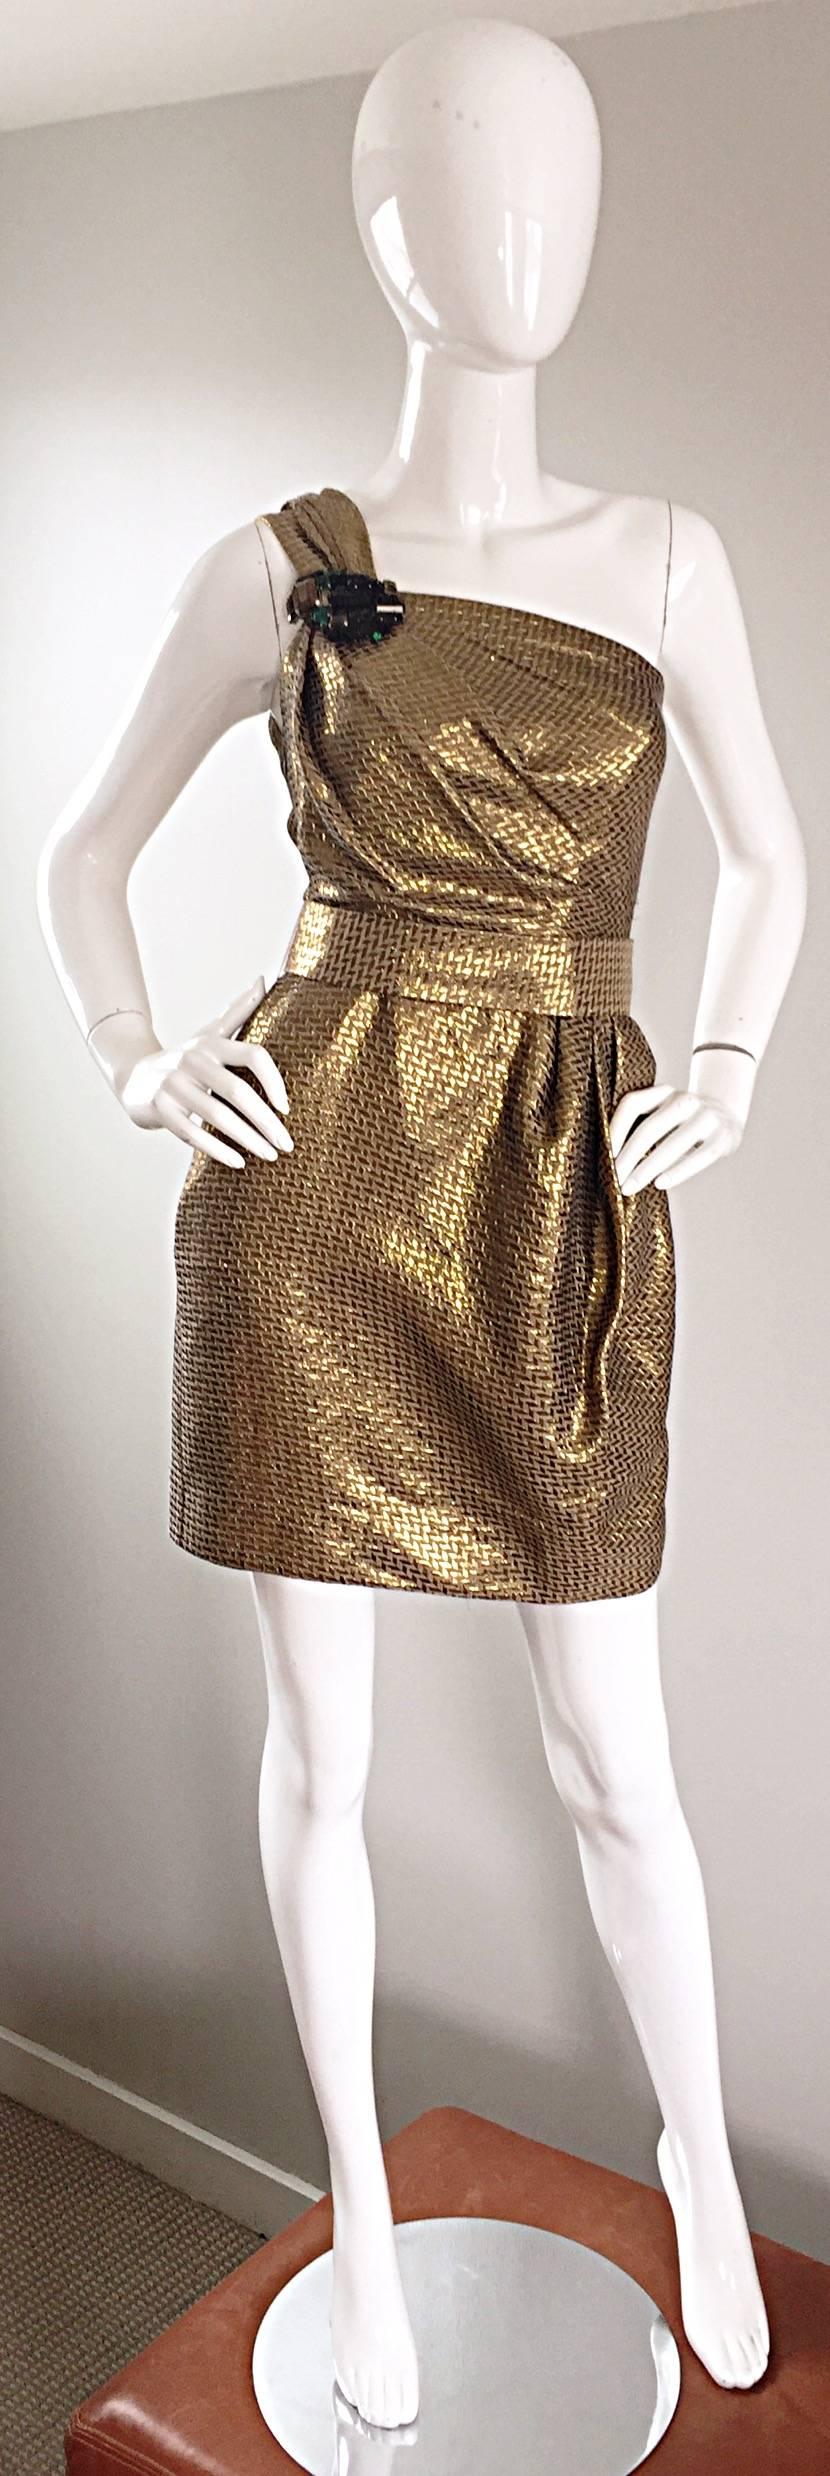 Stunning golden bronze one shoulder jeweled belted Grecian cocktail mini dress by British designer, MATTHEW WILLIAMSON! So much detail went into the construction of this go lend metallic jacquard beauty! Textured metallic fabric holds shape